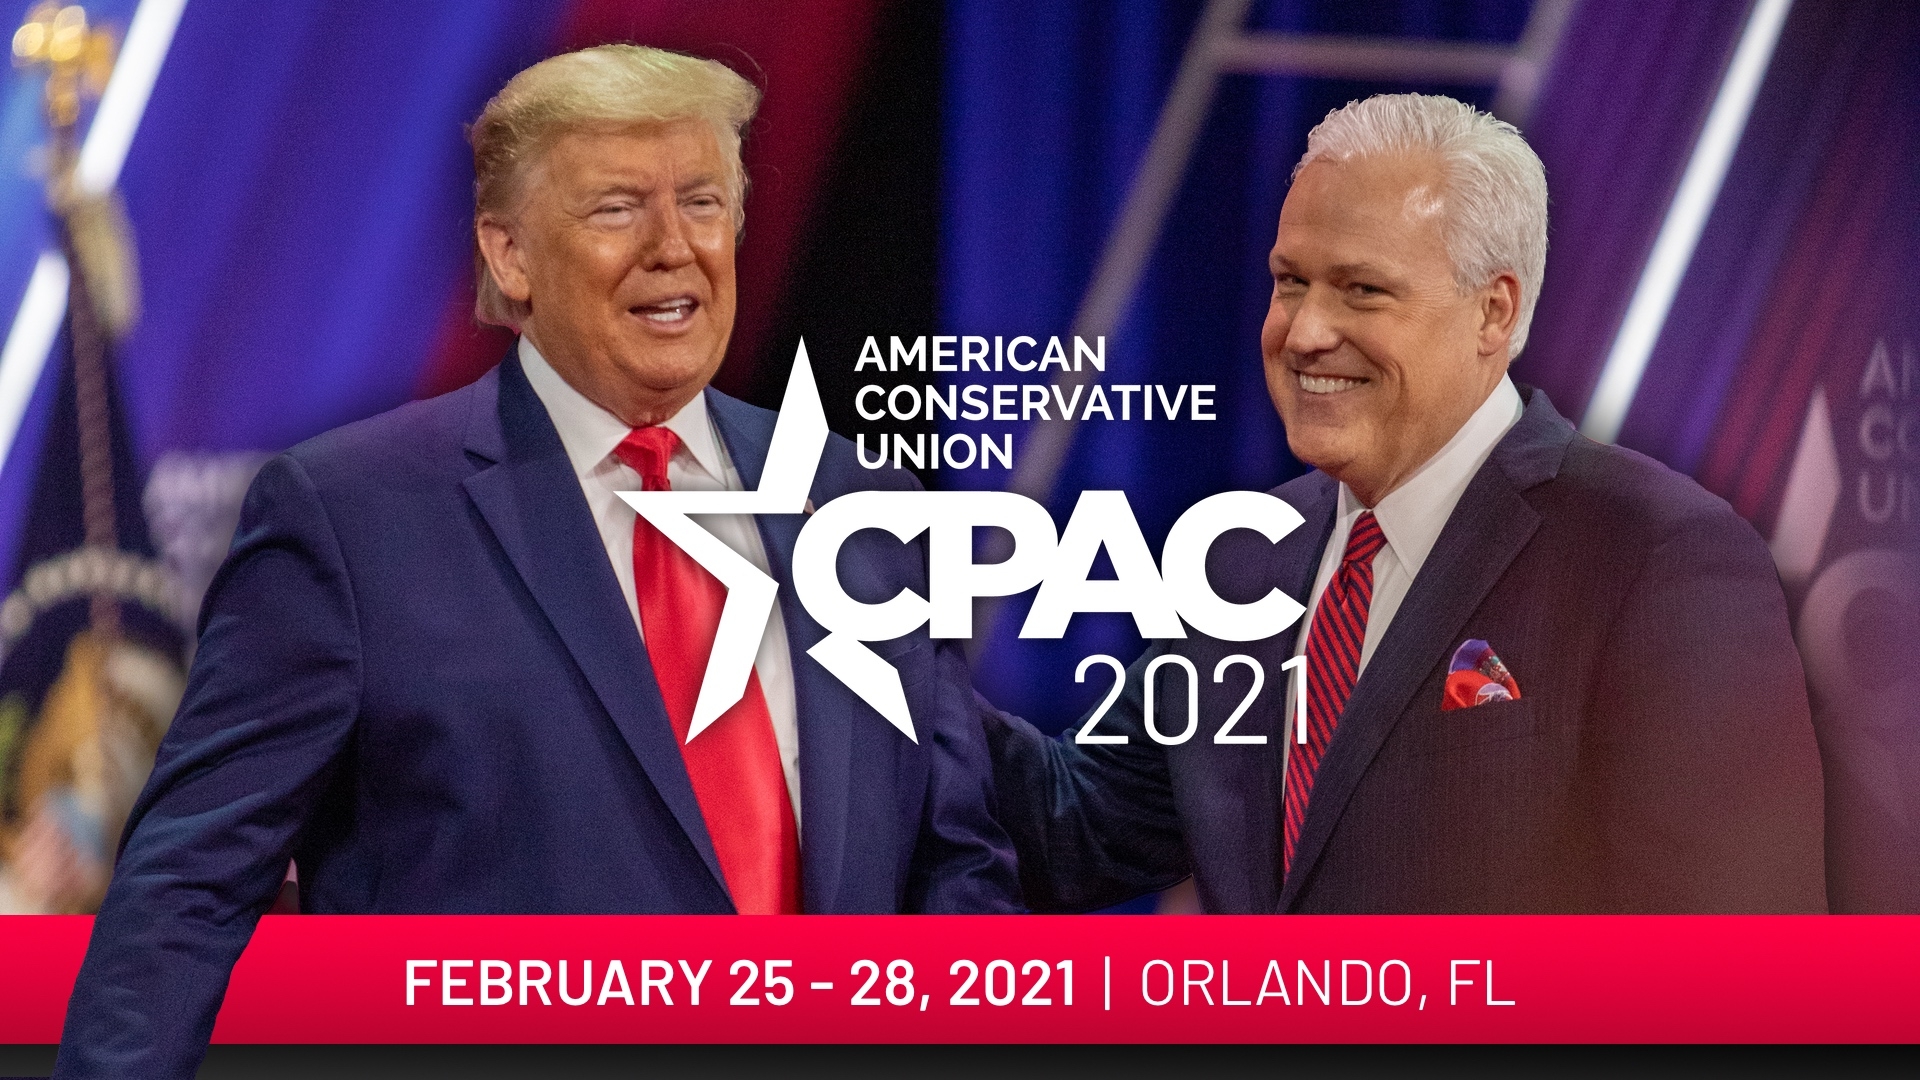 How to watch CPAC 2021 Live, Online, Speakers and Schedule KnowInsiders